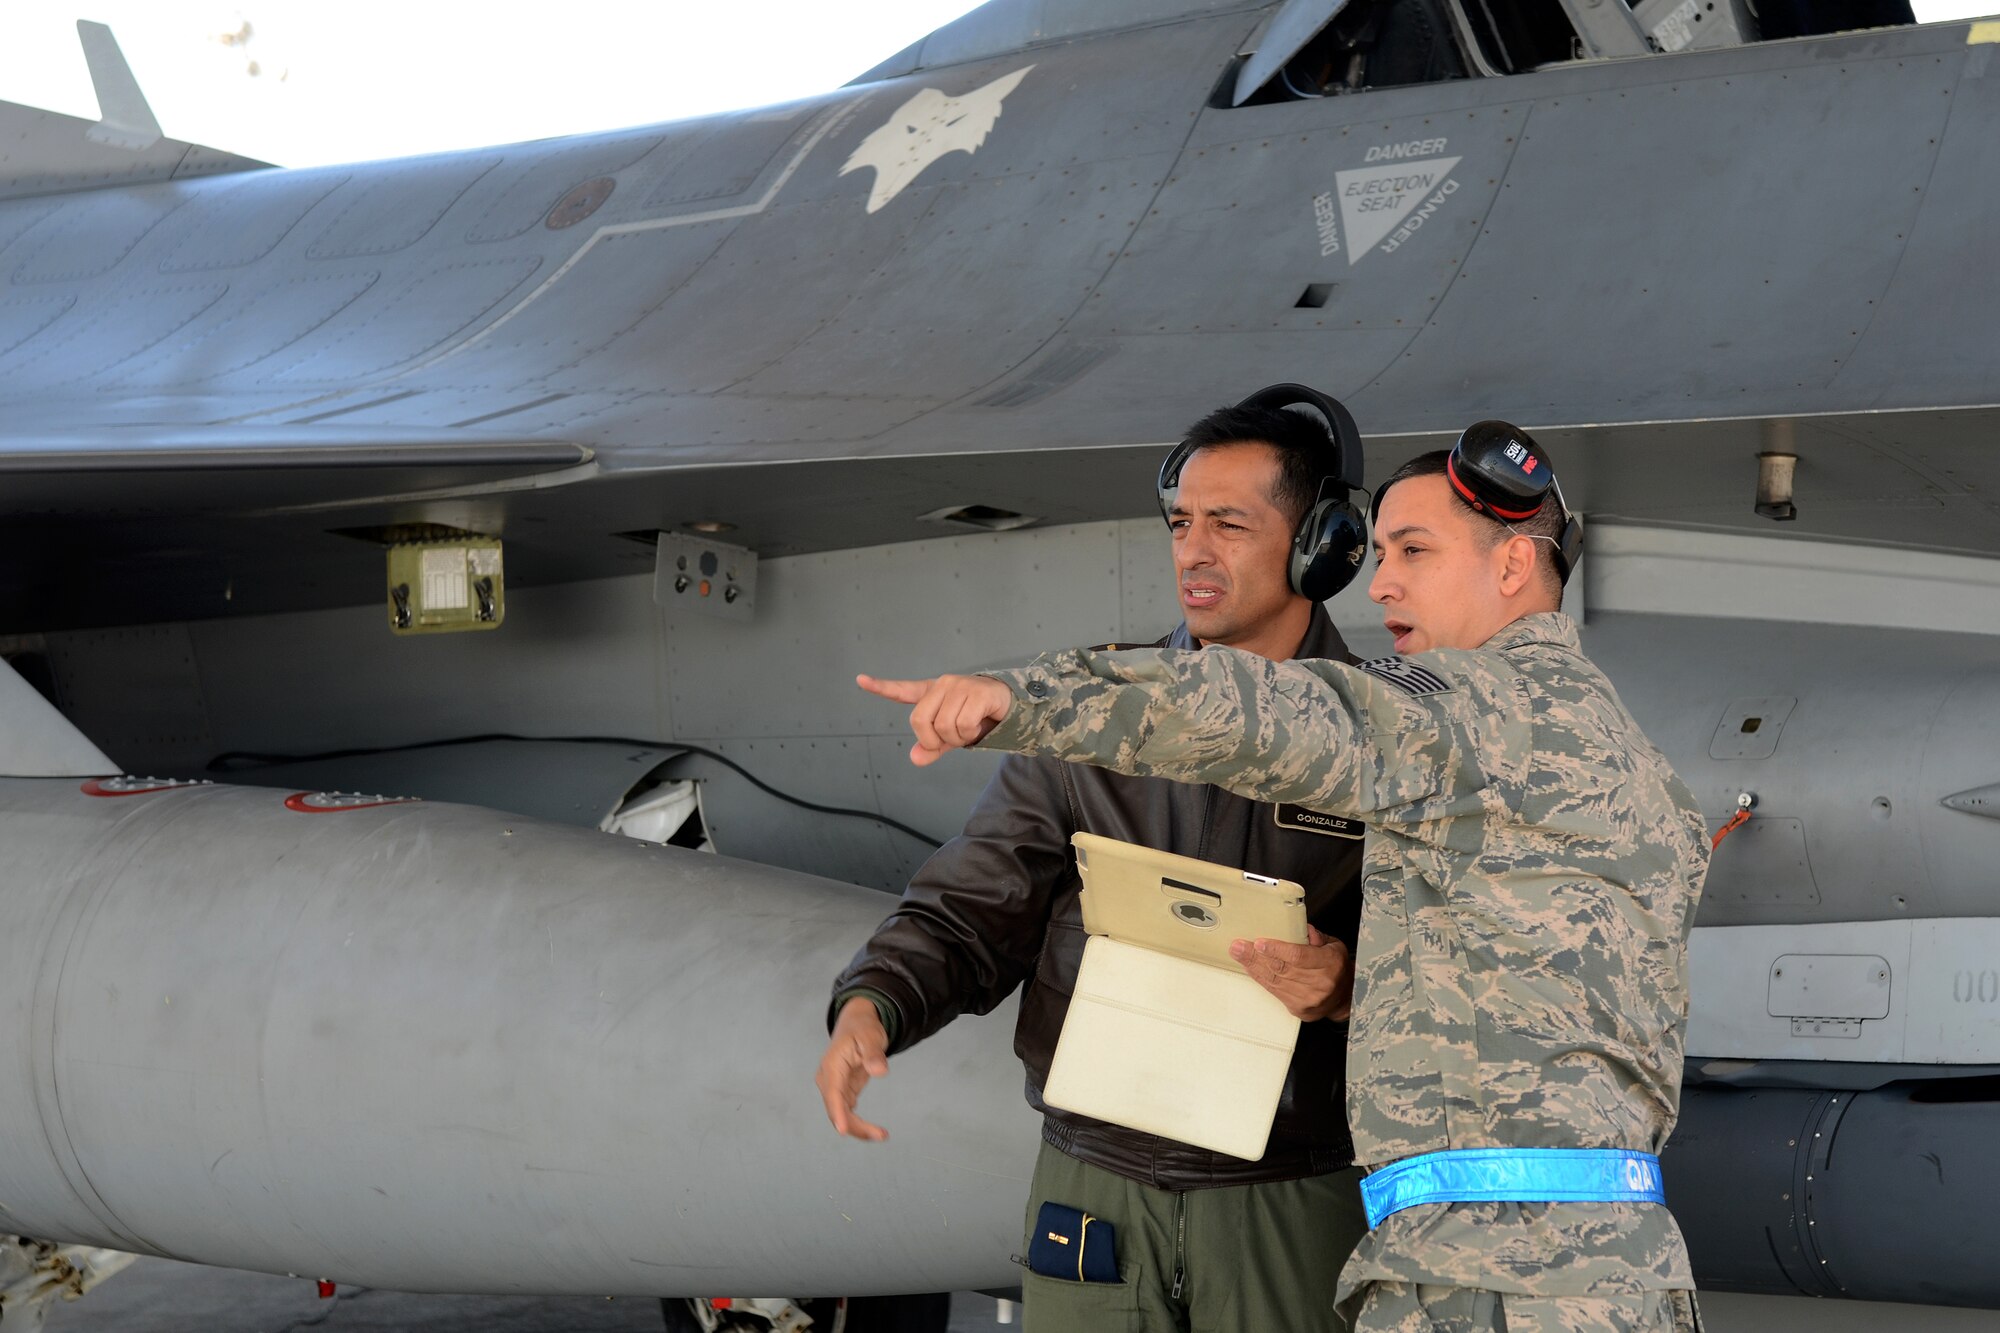 Maj. Juan Gonzalez (left), a Colombia Air Force maintenance officer, receives a flightline orientation from U.S. Air Force Tech. Sgt. Michael Hernandez, an F-16 crew chief with the 495th Fighter Group, Det 157 at McEntire Joint National Guard Base, S.C., during a visit to the base Feb. 20, 2015.  In addition, the Colombia Air Force commander, General Guillermo Leon Leon and six flight and maintenance officers are visiting the South Carolina Air National Guard as part of a Key Leader Engagement and Subject Matter Expert exchange sharing information on flying and maintenance operations at McEntire and fostering relationships between the militaries. The visit was the latest engagement for the State Partnership Program between South Carolina and the Republic of Colombia. (U.S. Air National Guard photo by Tech. Sgt. Caycee Watson/Released)